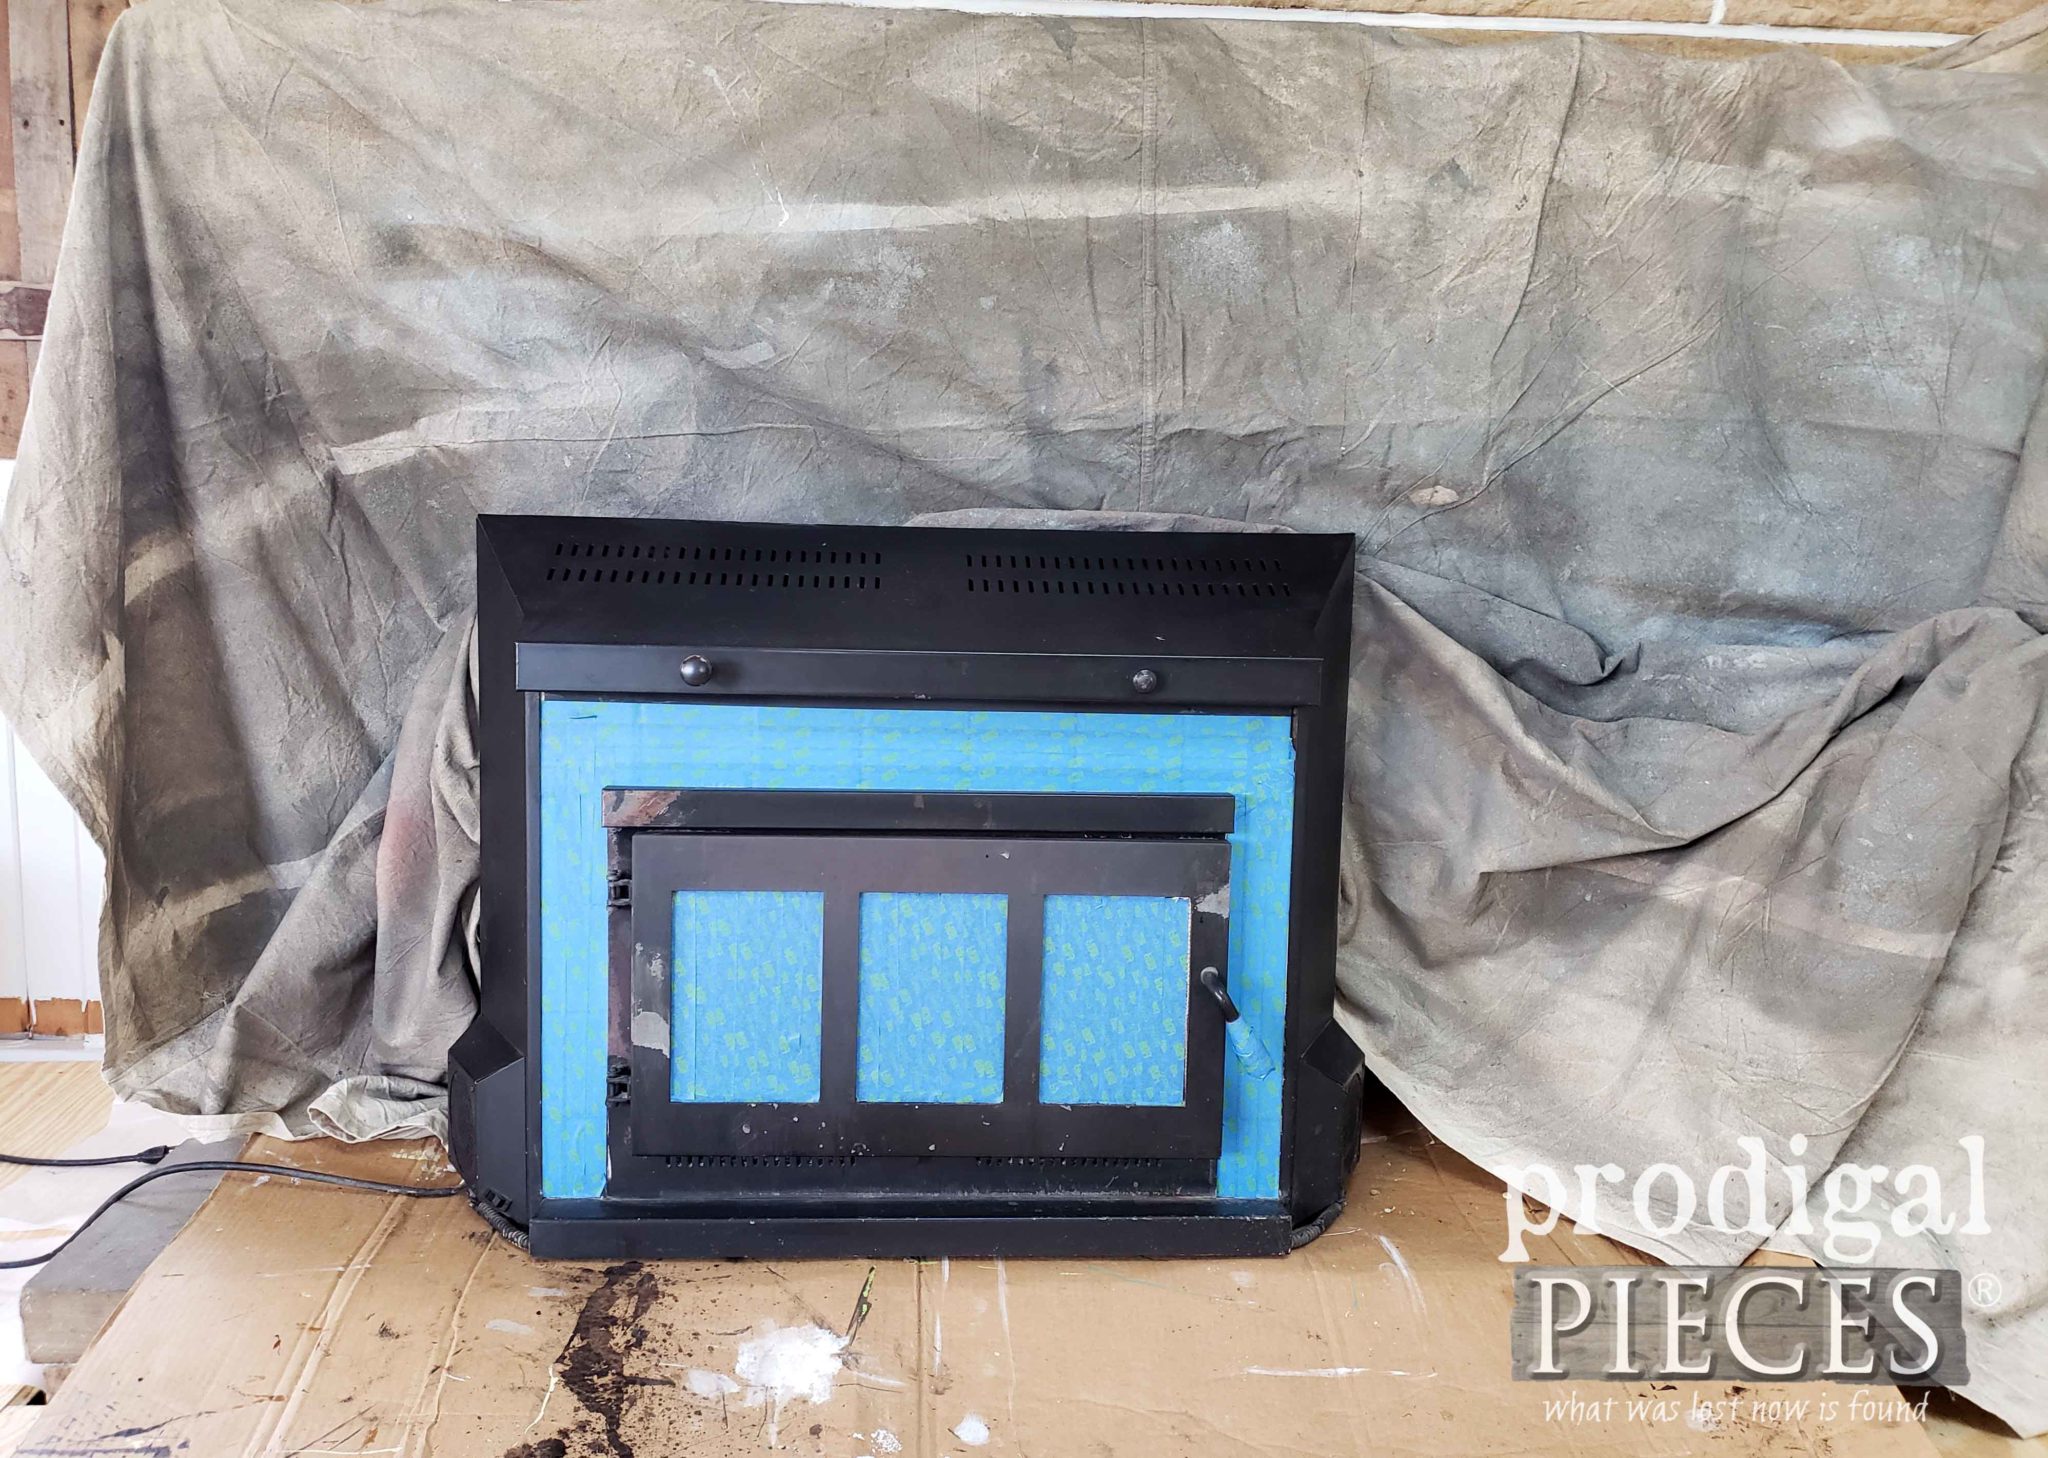 How to Prep and Clean a Fireplace Insert for Painting | prodigalpieces.com